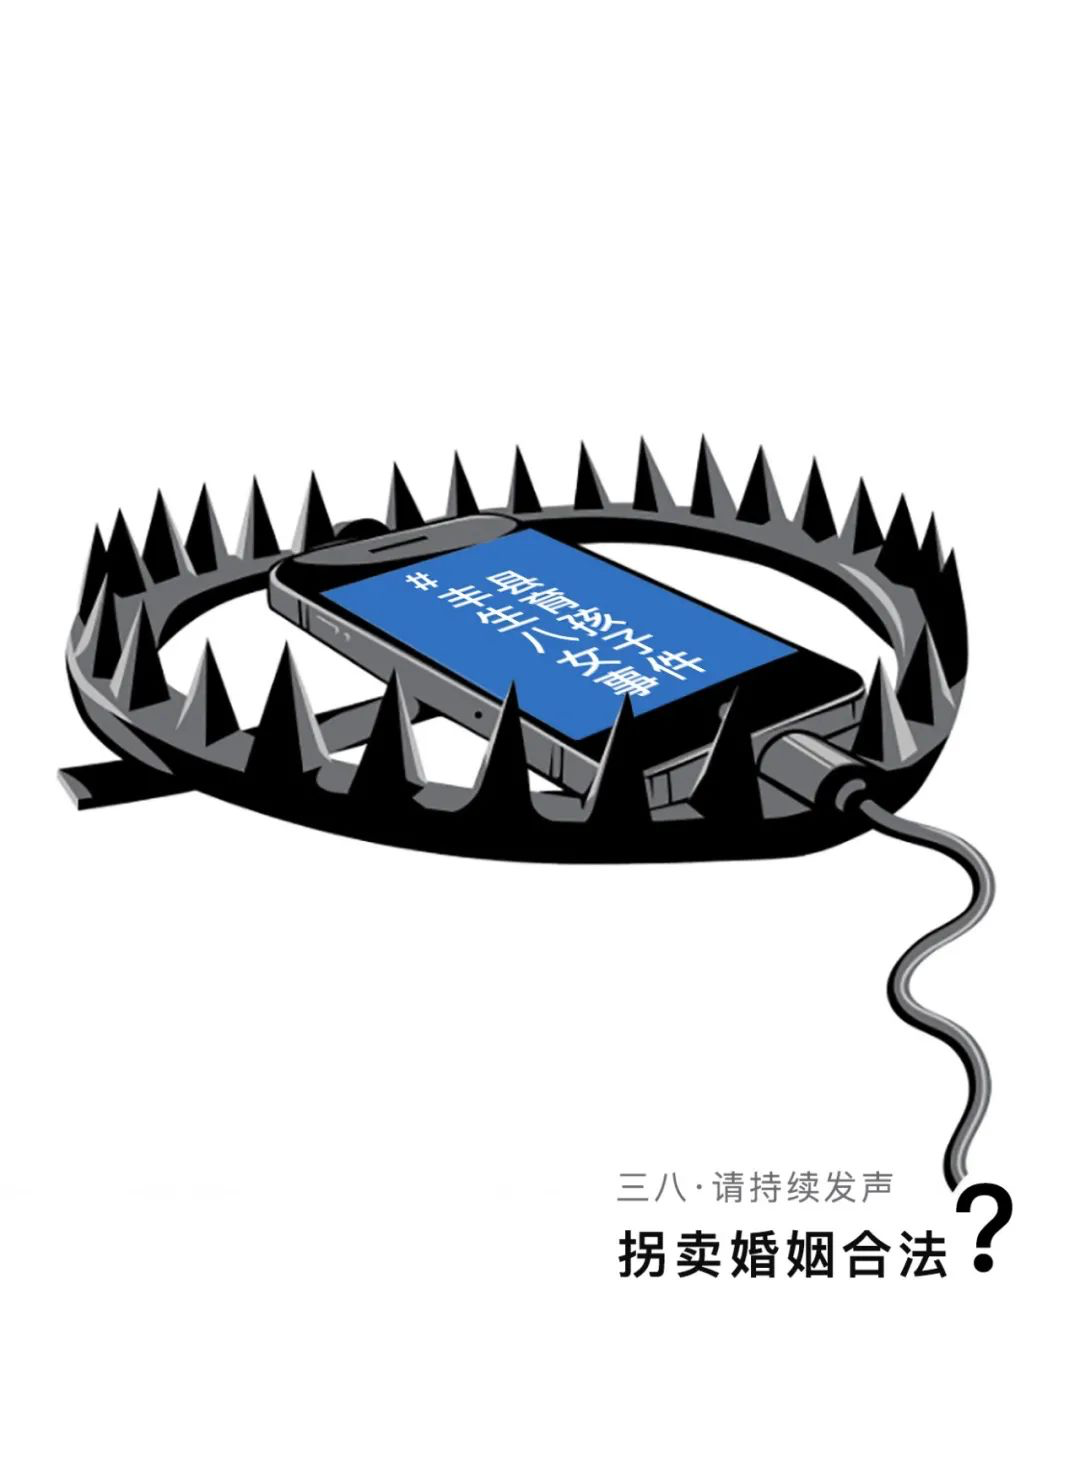 Black, white and blue illustration of an open bear trap with a cell phone in the jaws of the trap. The cell phone screen displays the hashtag #FengxianMother-of-8Incident.” Two messages at the bottom of the illustration read “On March 8, Please Keep Speaking Out” and “Is abduction-based marriage legal?”